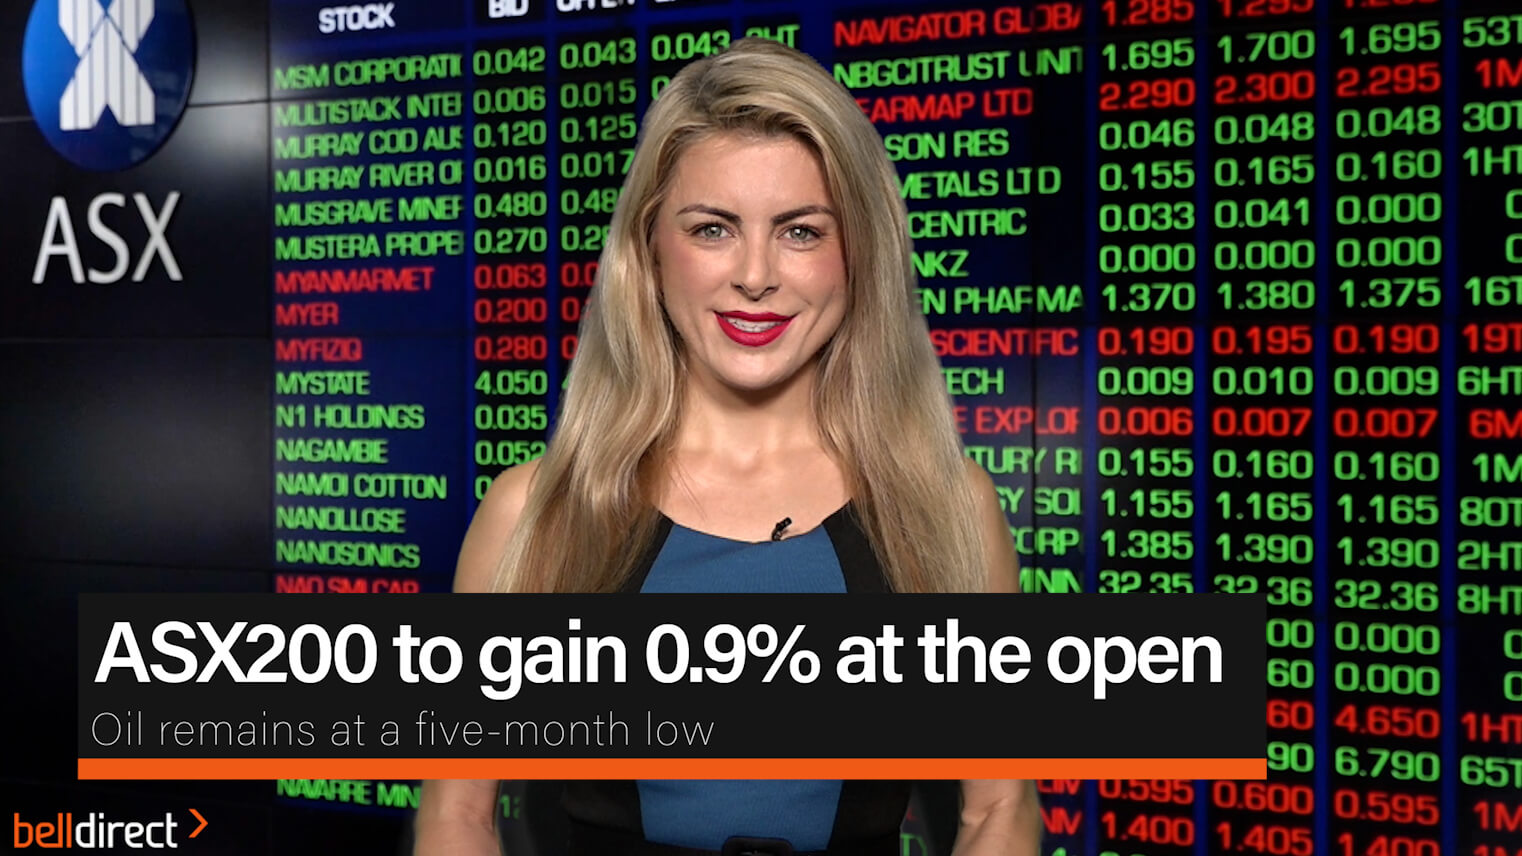 ASX200 to gain 0.9% at the open